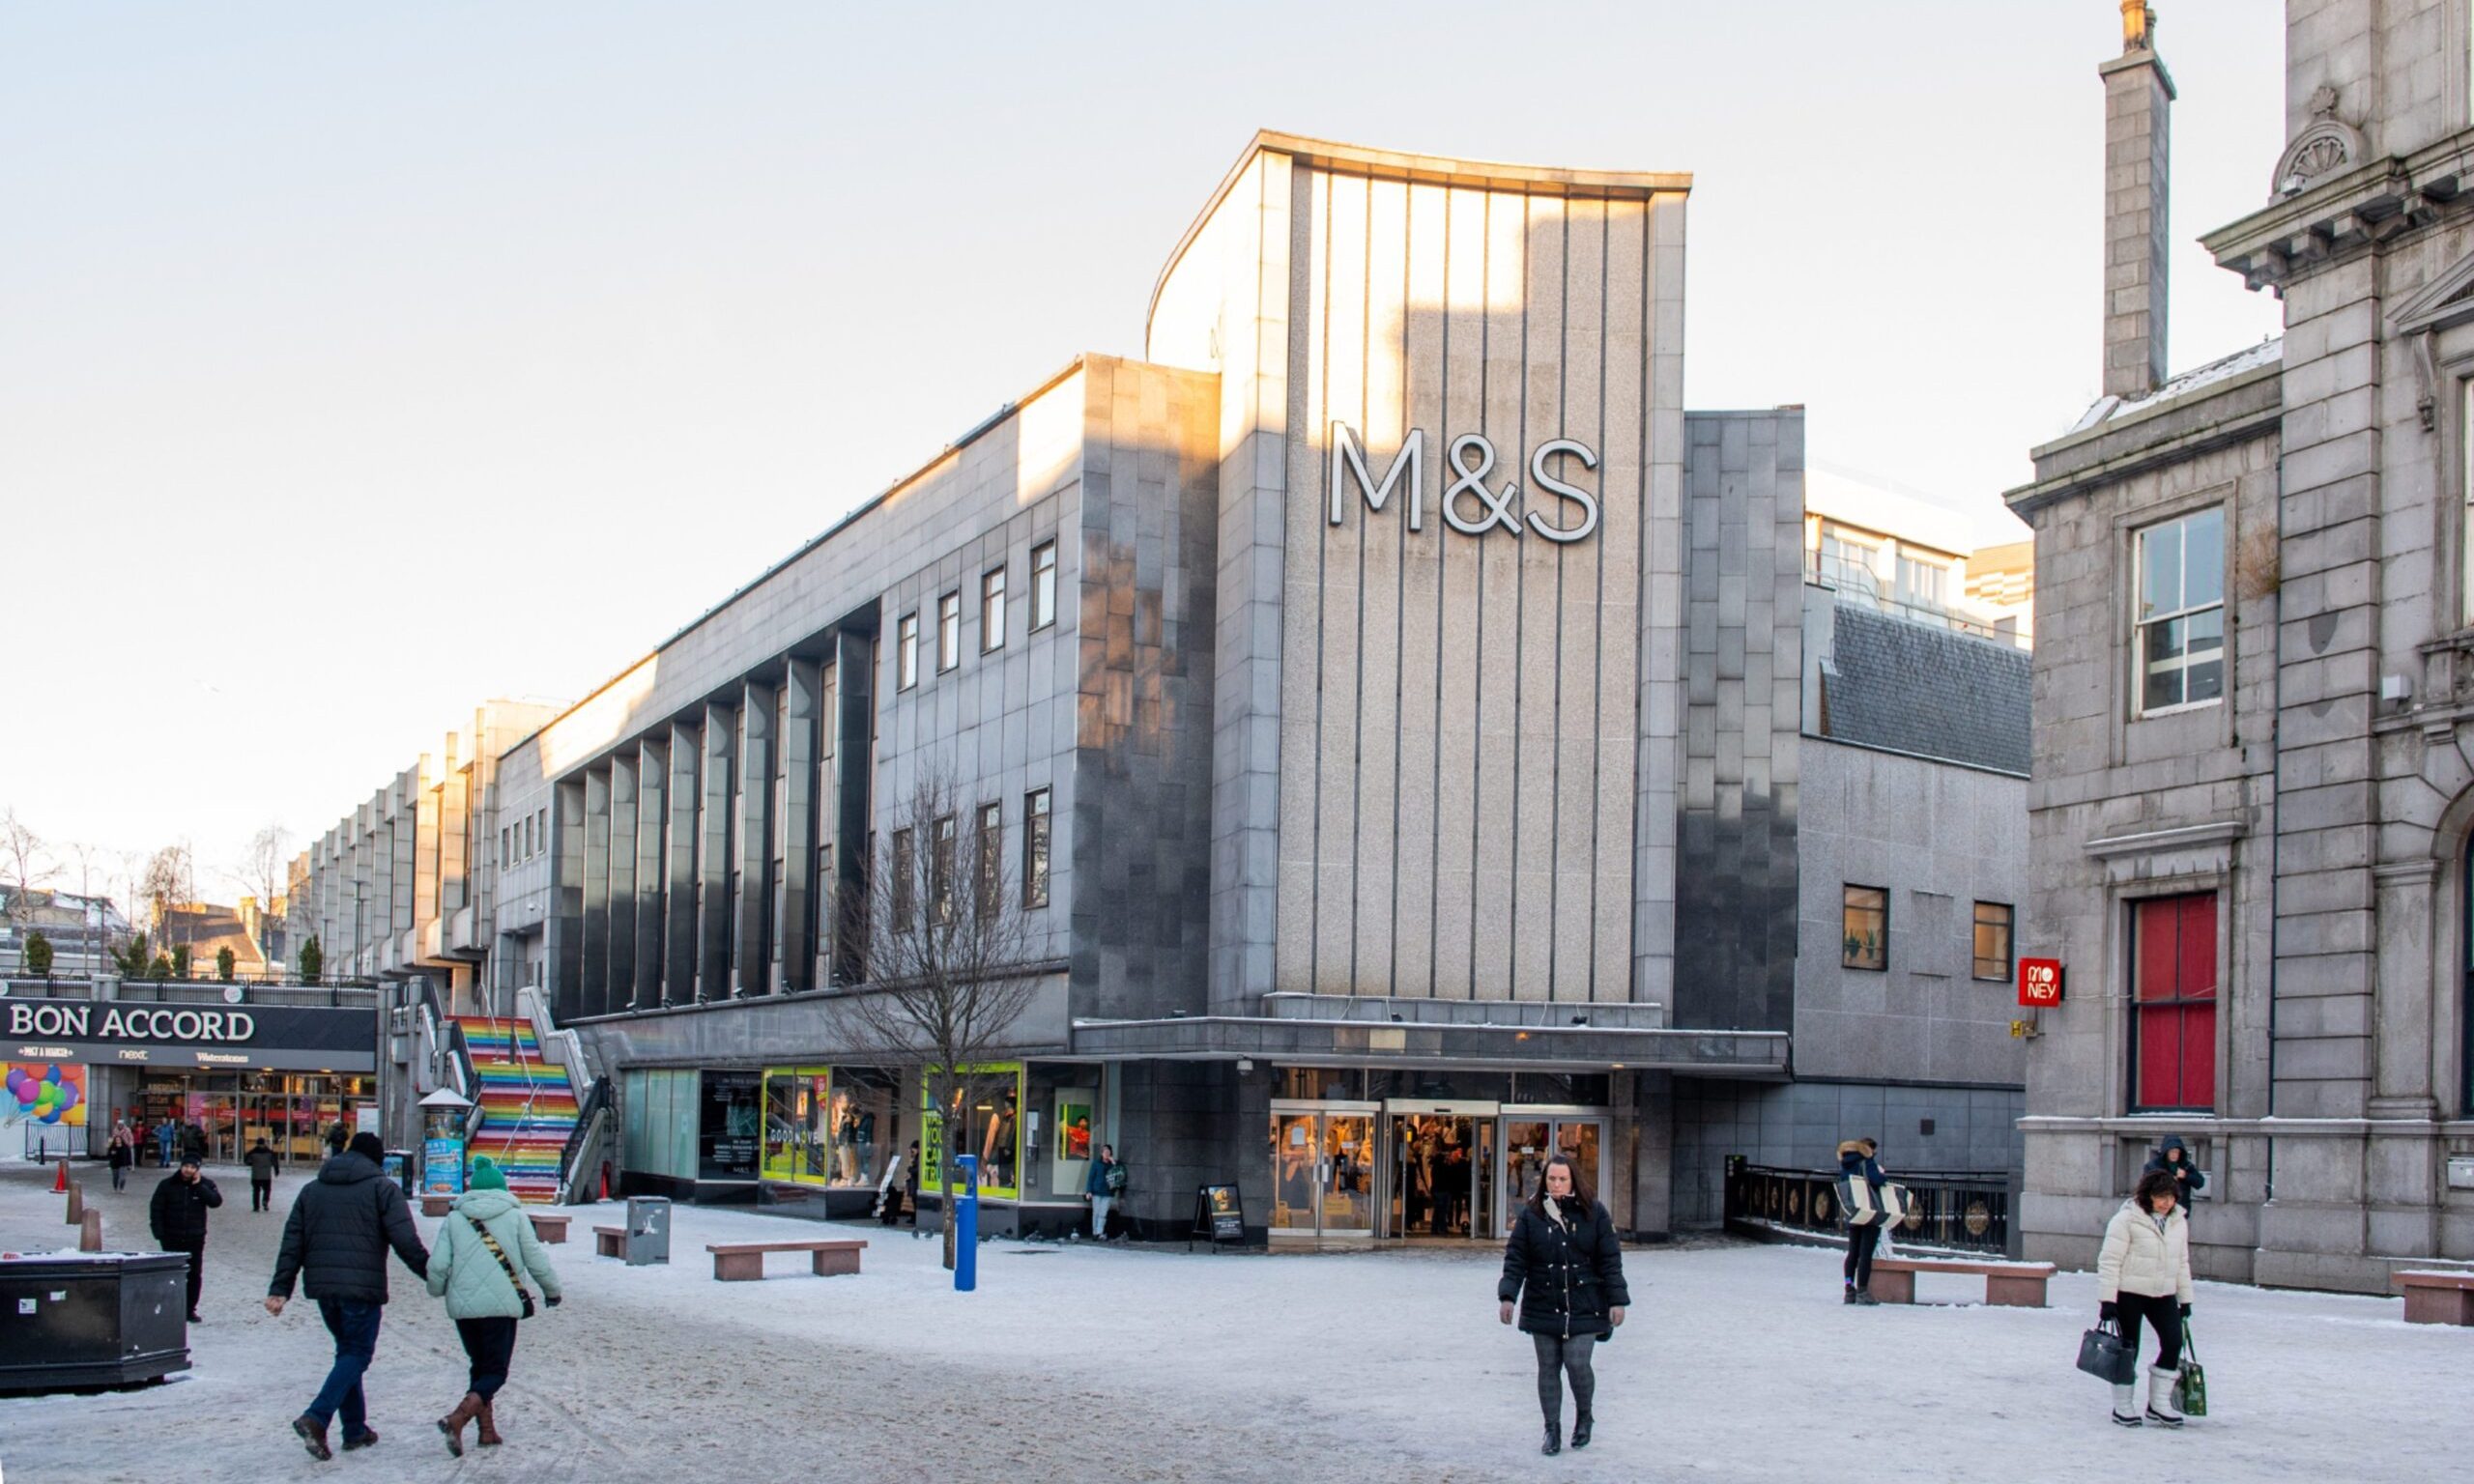 The M&S in Aberdeen city centre.